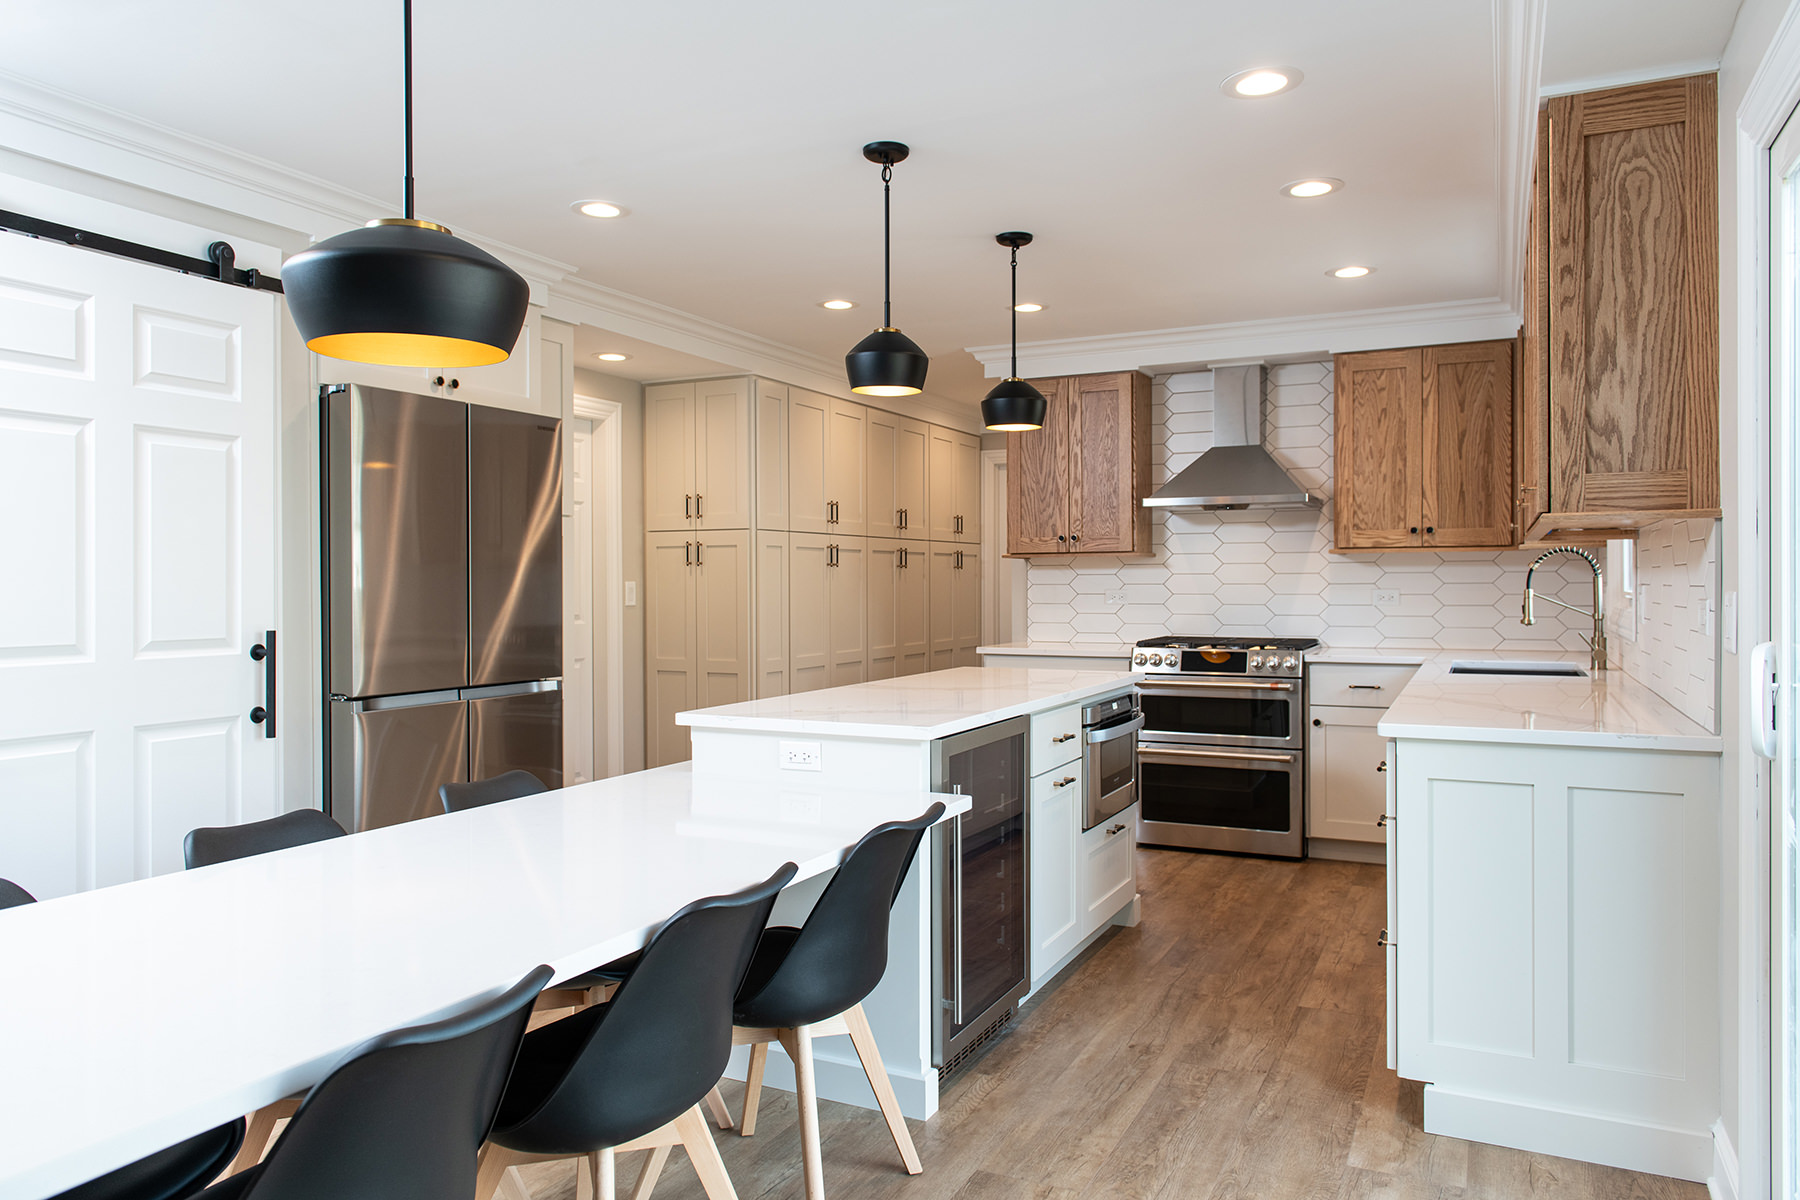 Modern farmhouse update in Libertyville with white countertops, white lower cabinets and wood upper cabinets. Modern black lights over the island and stainless steel appliances.